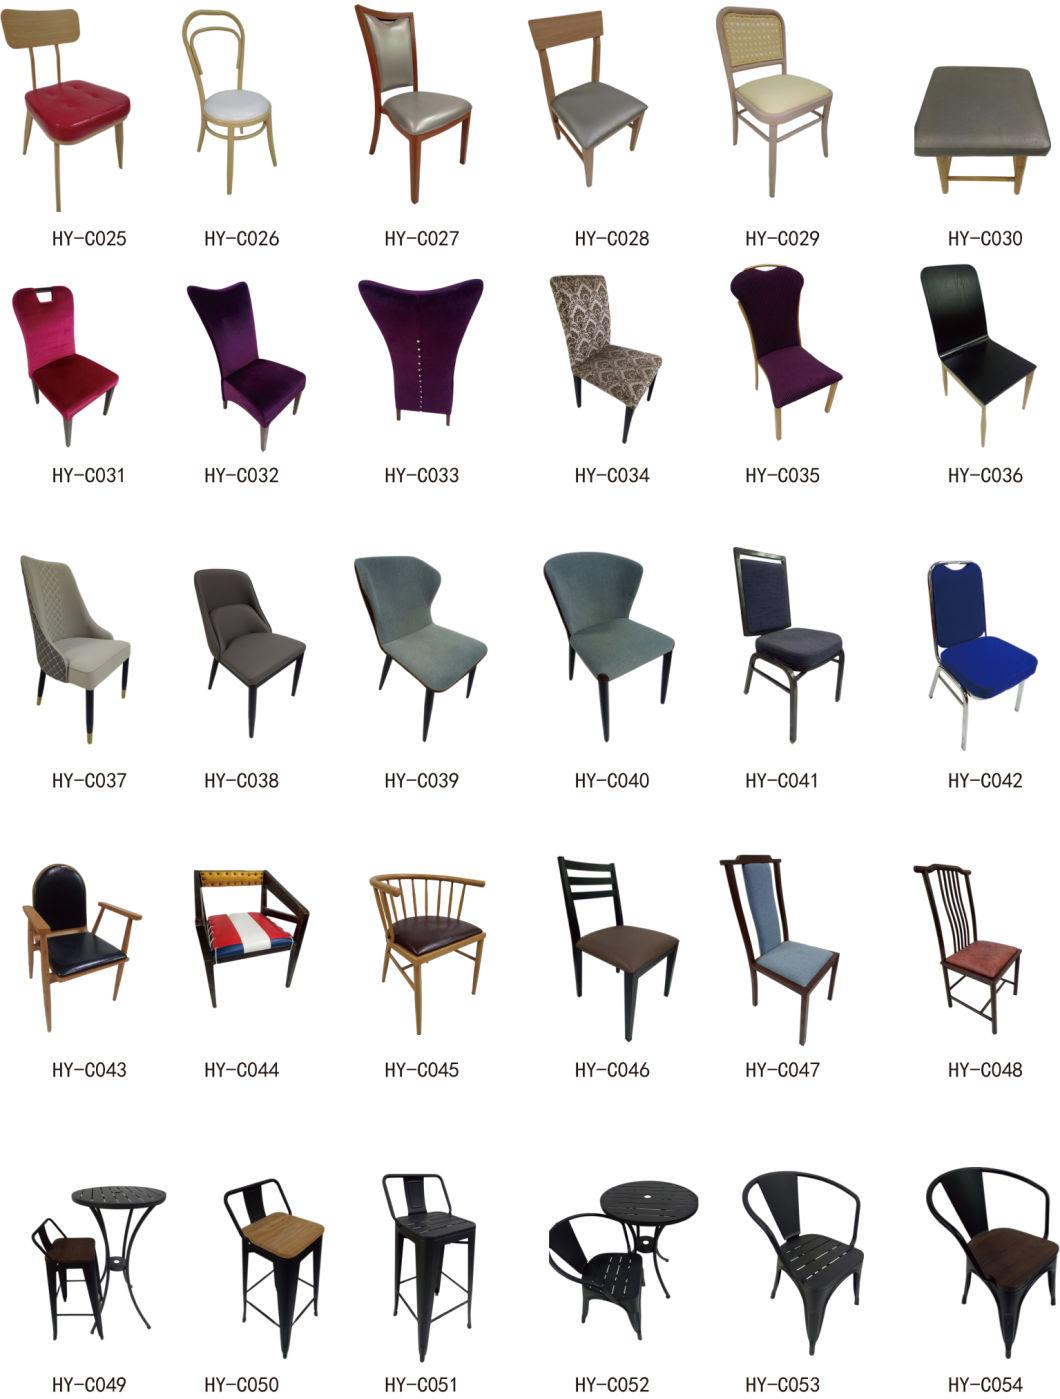 High Quality Metal Back Event Chair Wholesale Wedding Chairs Metal Hotel Conference Wedding Catering Banquet Chair, Chair Banquet